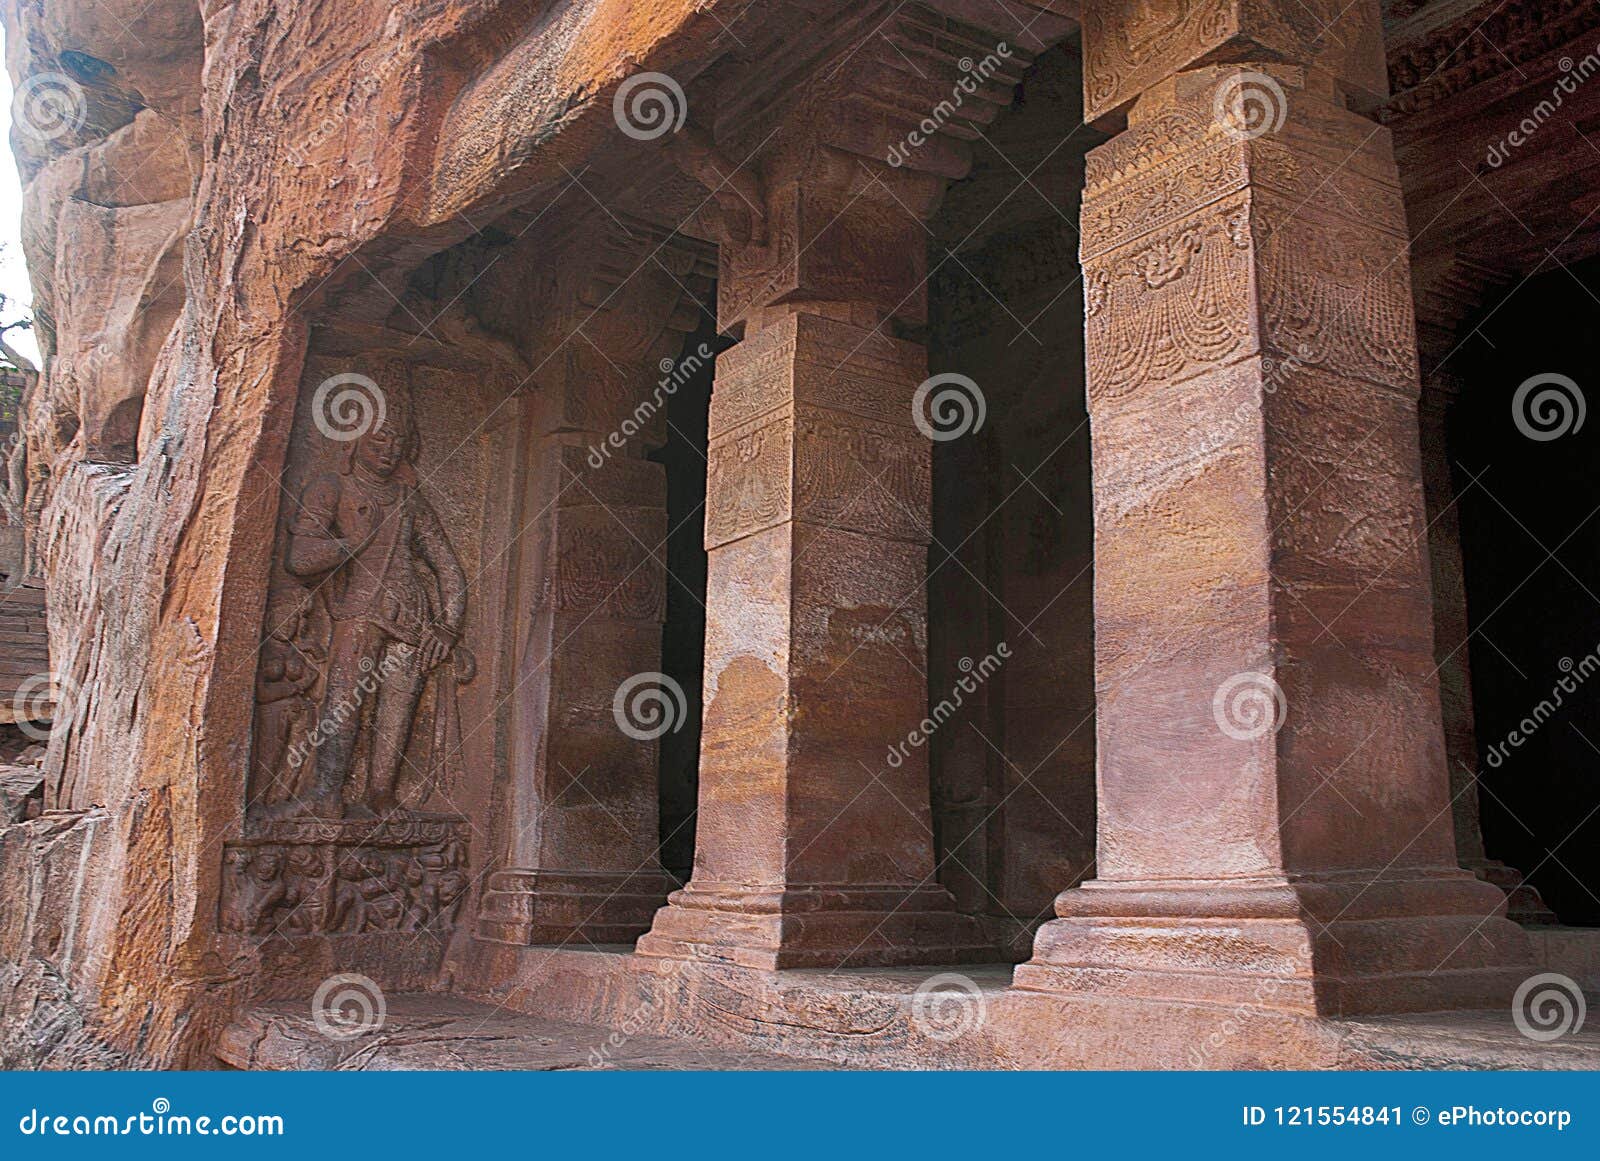 cave 2 : facade, right side view. badami caves, karnataka, india. depicting carvings of dwarfish ganas, with bovine and equine hea